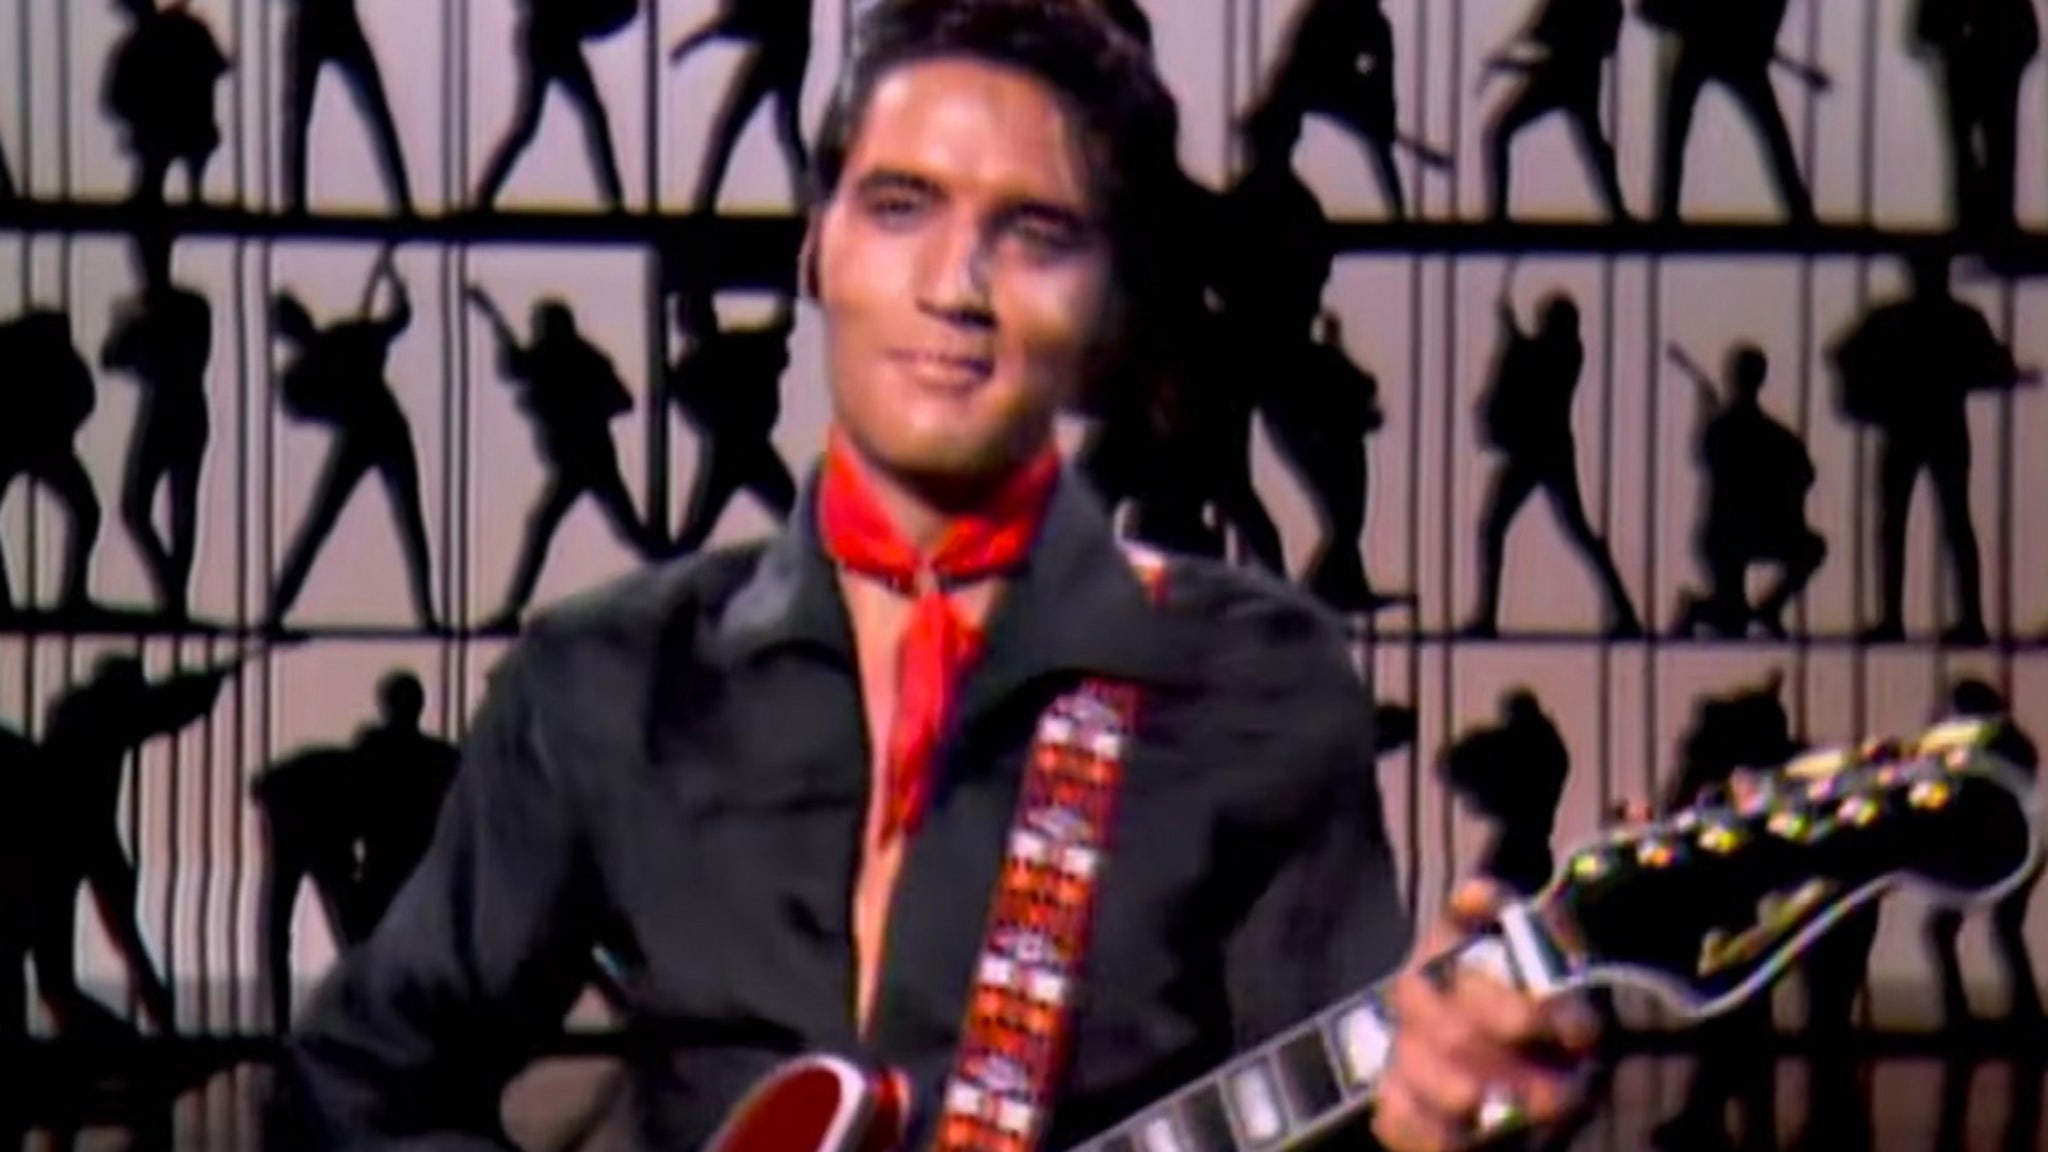 Elvis Presley guitar from the 1968 TV special could receive $ 1 million at auction